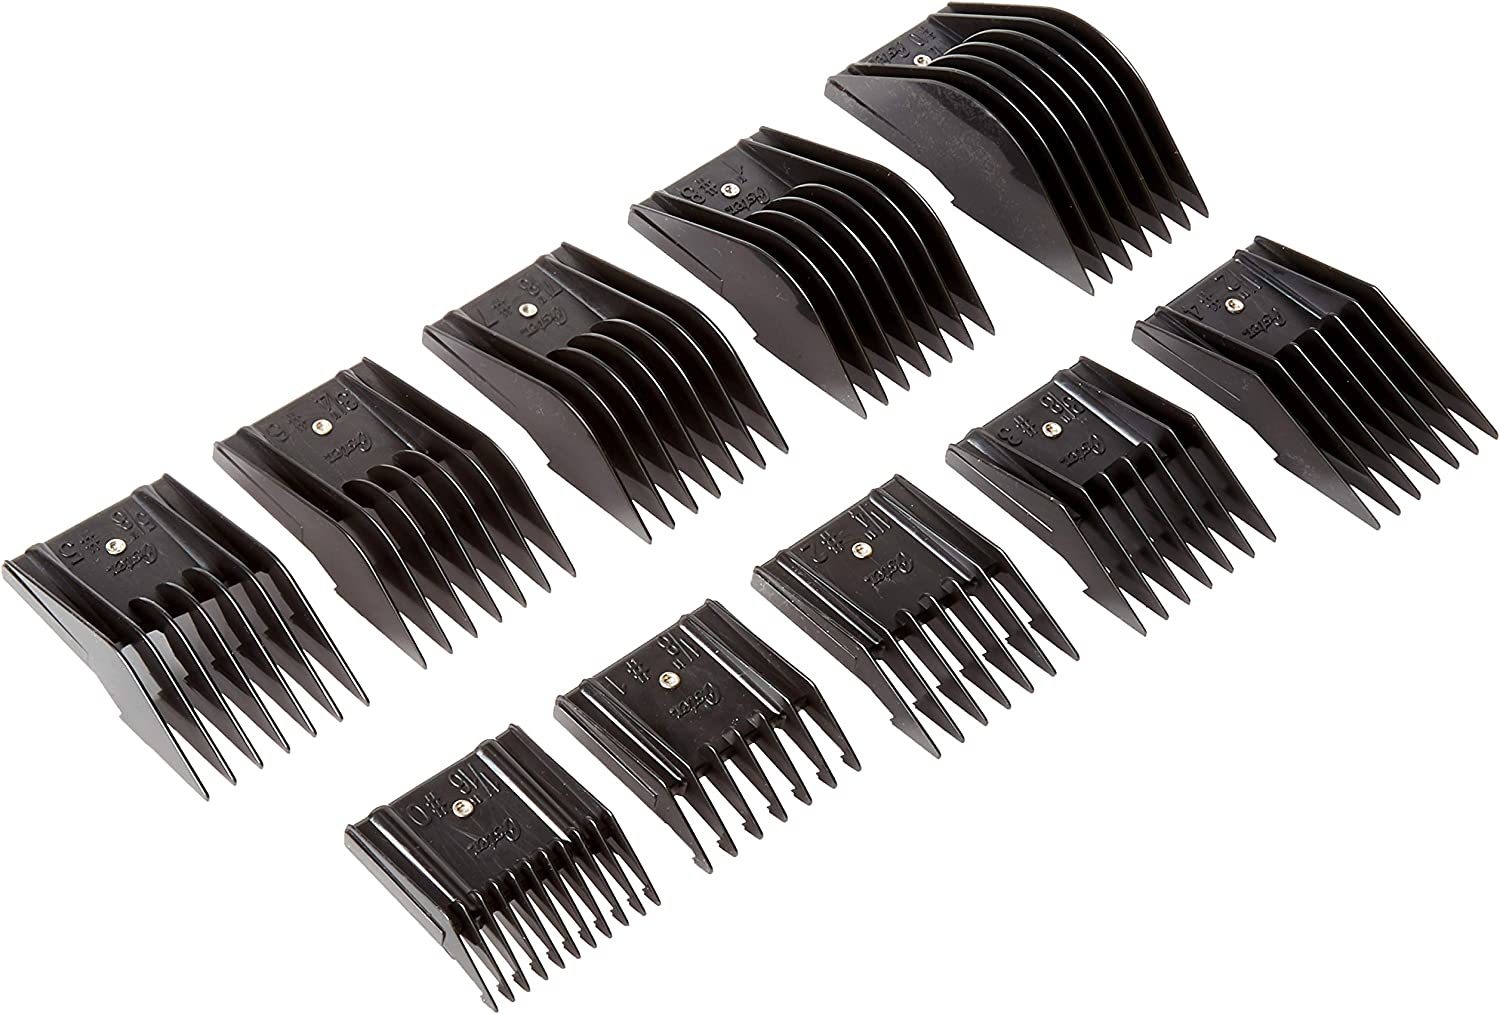 Oster 76926-900 10 Universal Comb Set Attachments Guide - $44.99